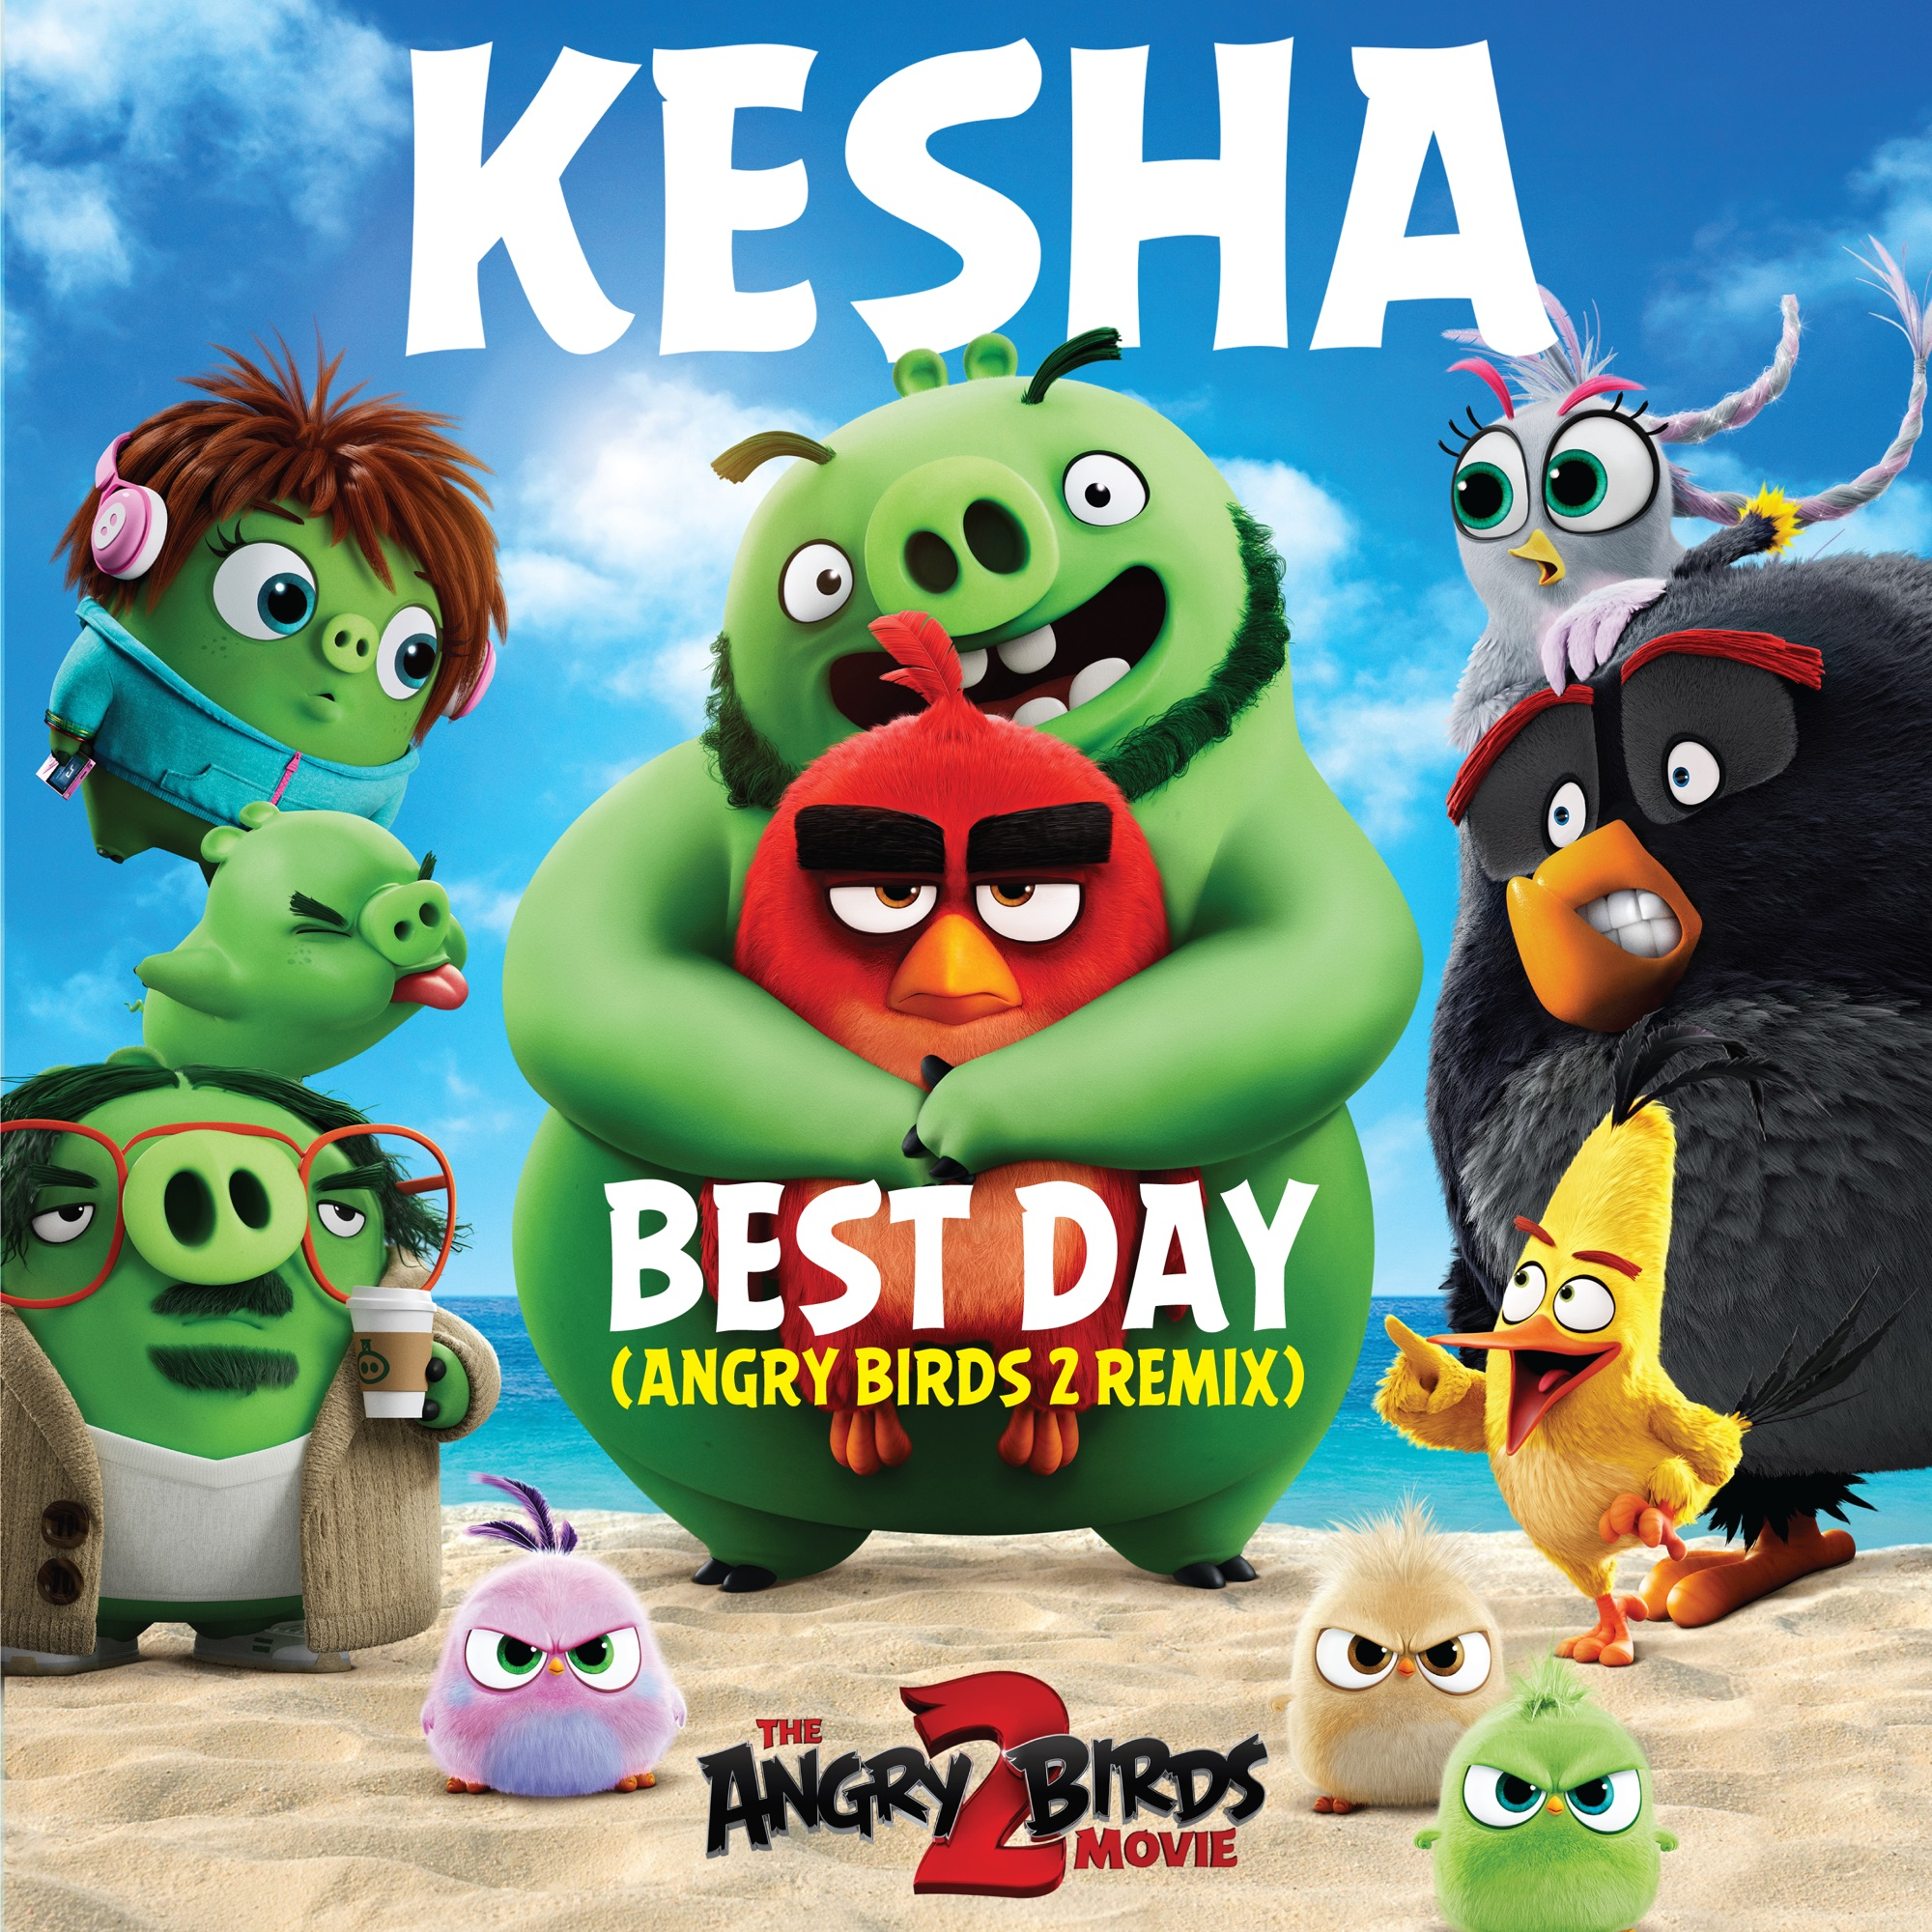 Kesha Best Day (Angry Birds 2 Remix) cover artwork